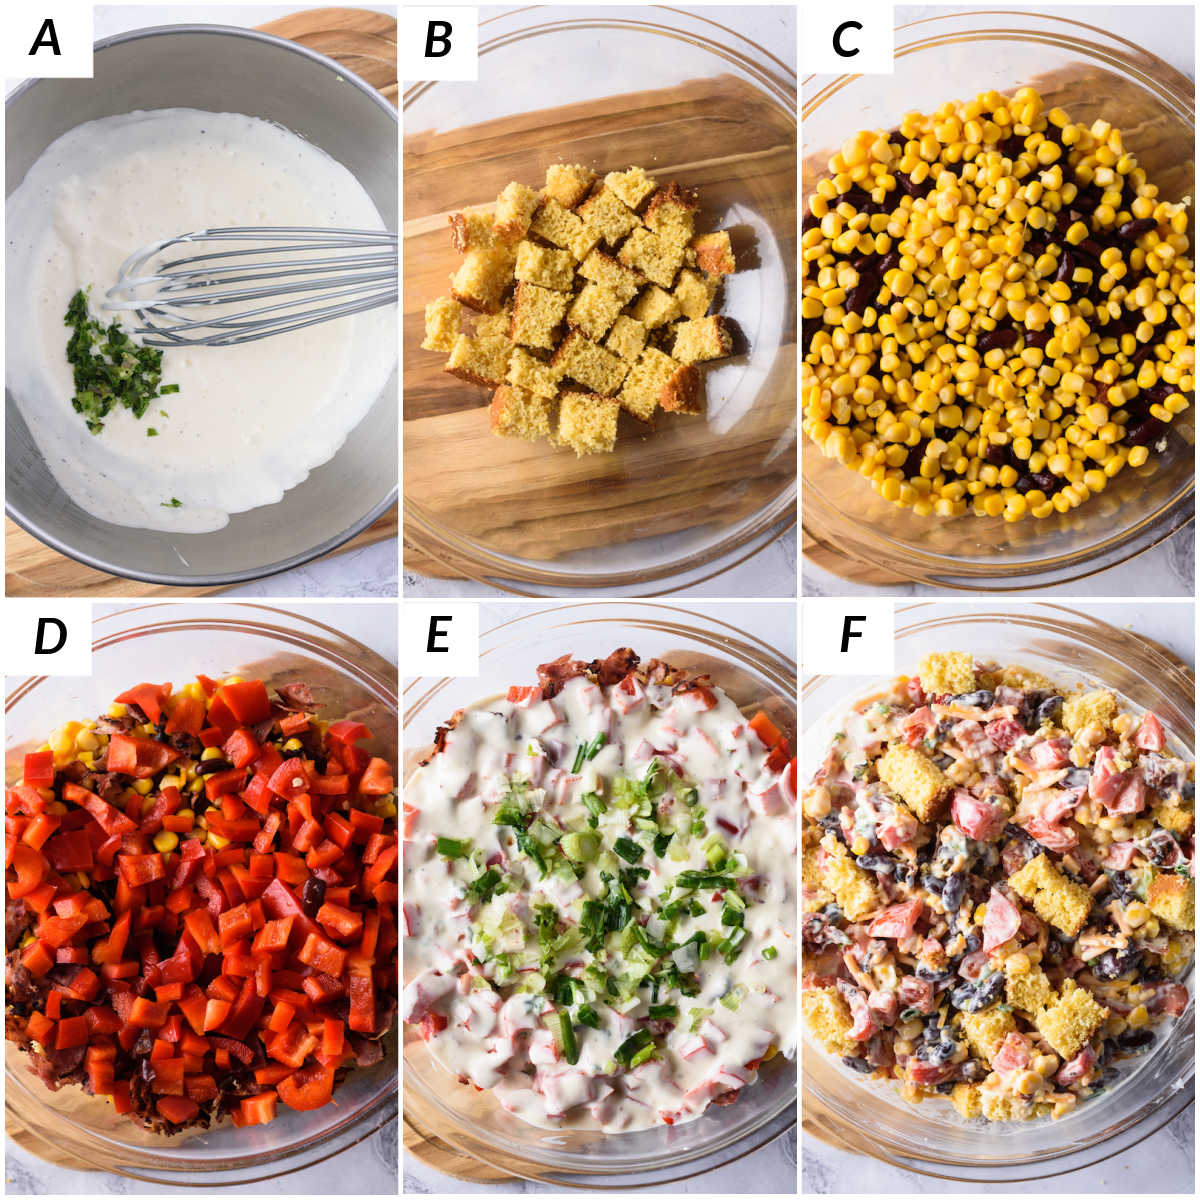 image collage showing the steps for making this cornbread salad recipe